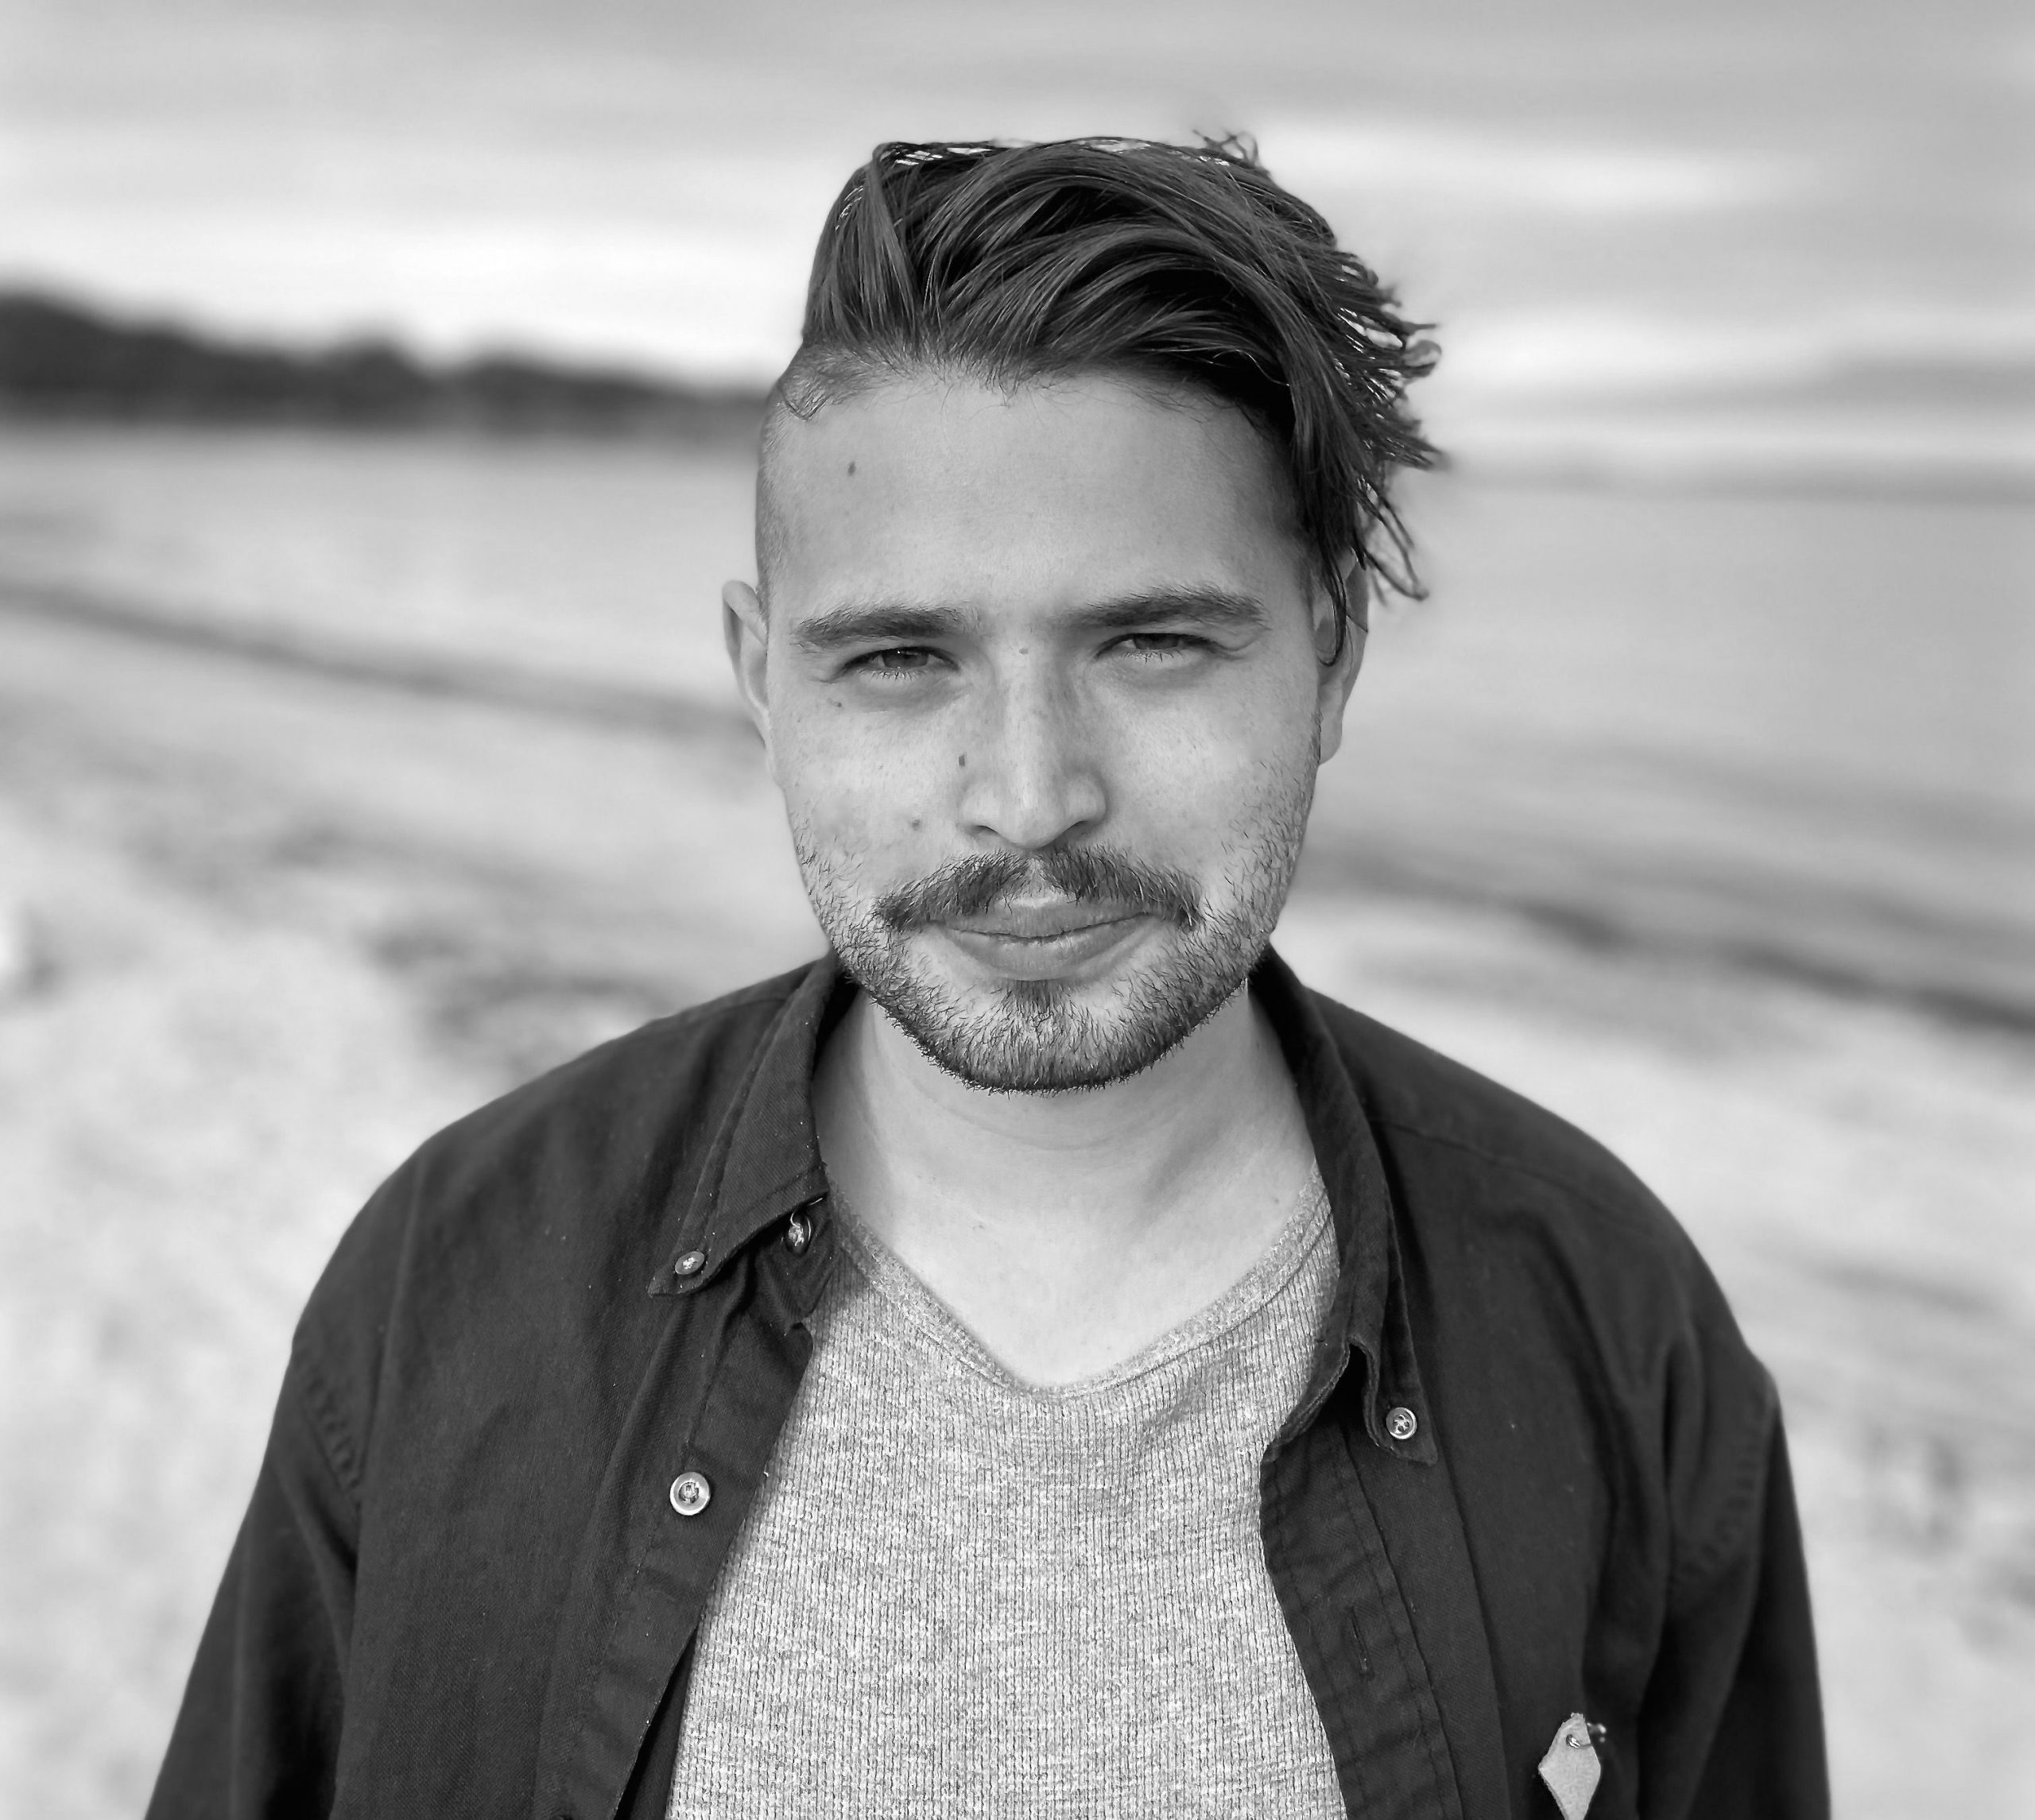 Philip Jonah Logan Geller is pictured in black and white from the sternum up. They wear a dark button-down shirt, open over a light coloured v-neck tee. The sport a half-smile as they gaze into camera, the waves of a beach visible behind them. They have dark eyes and short dark hair, trimmed on the sides, with a trimmed moustache and beard.